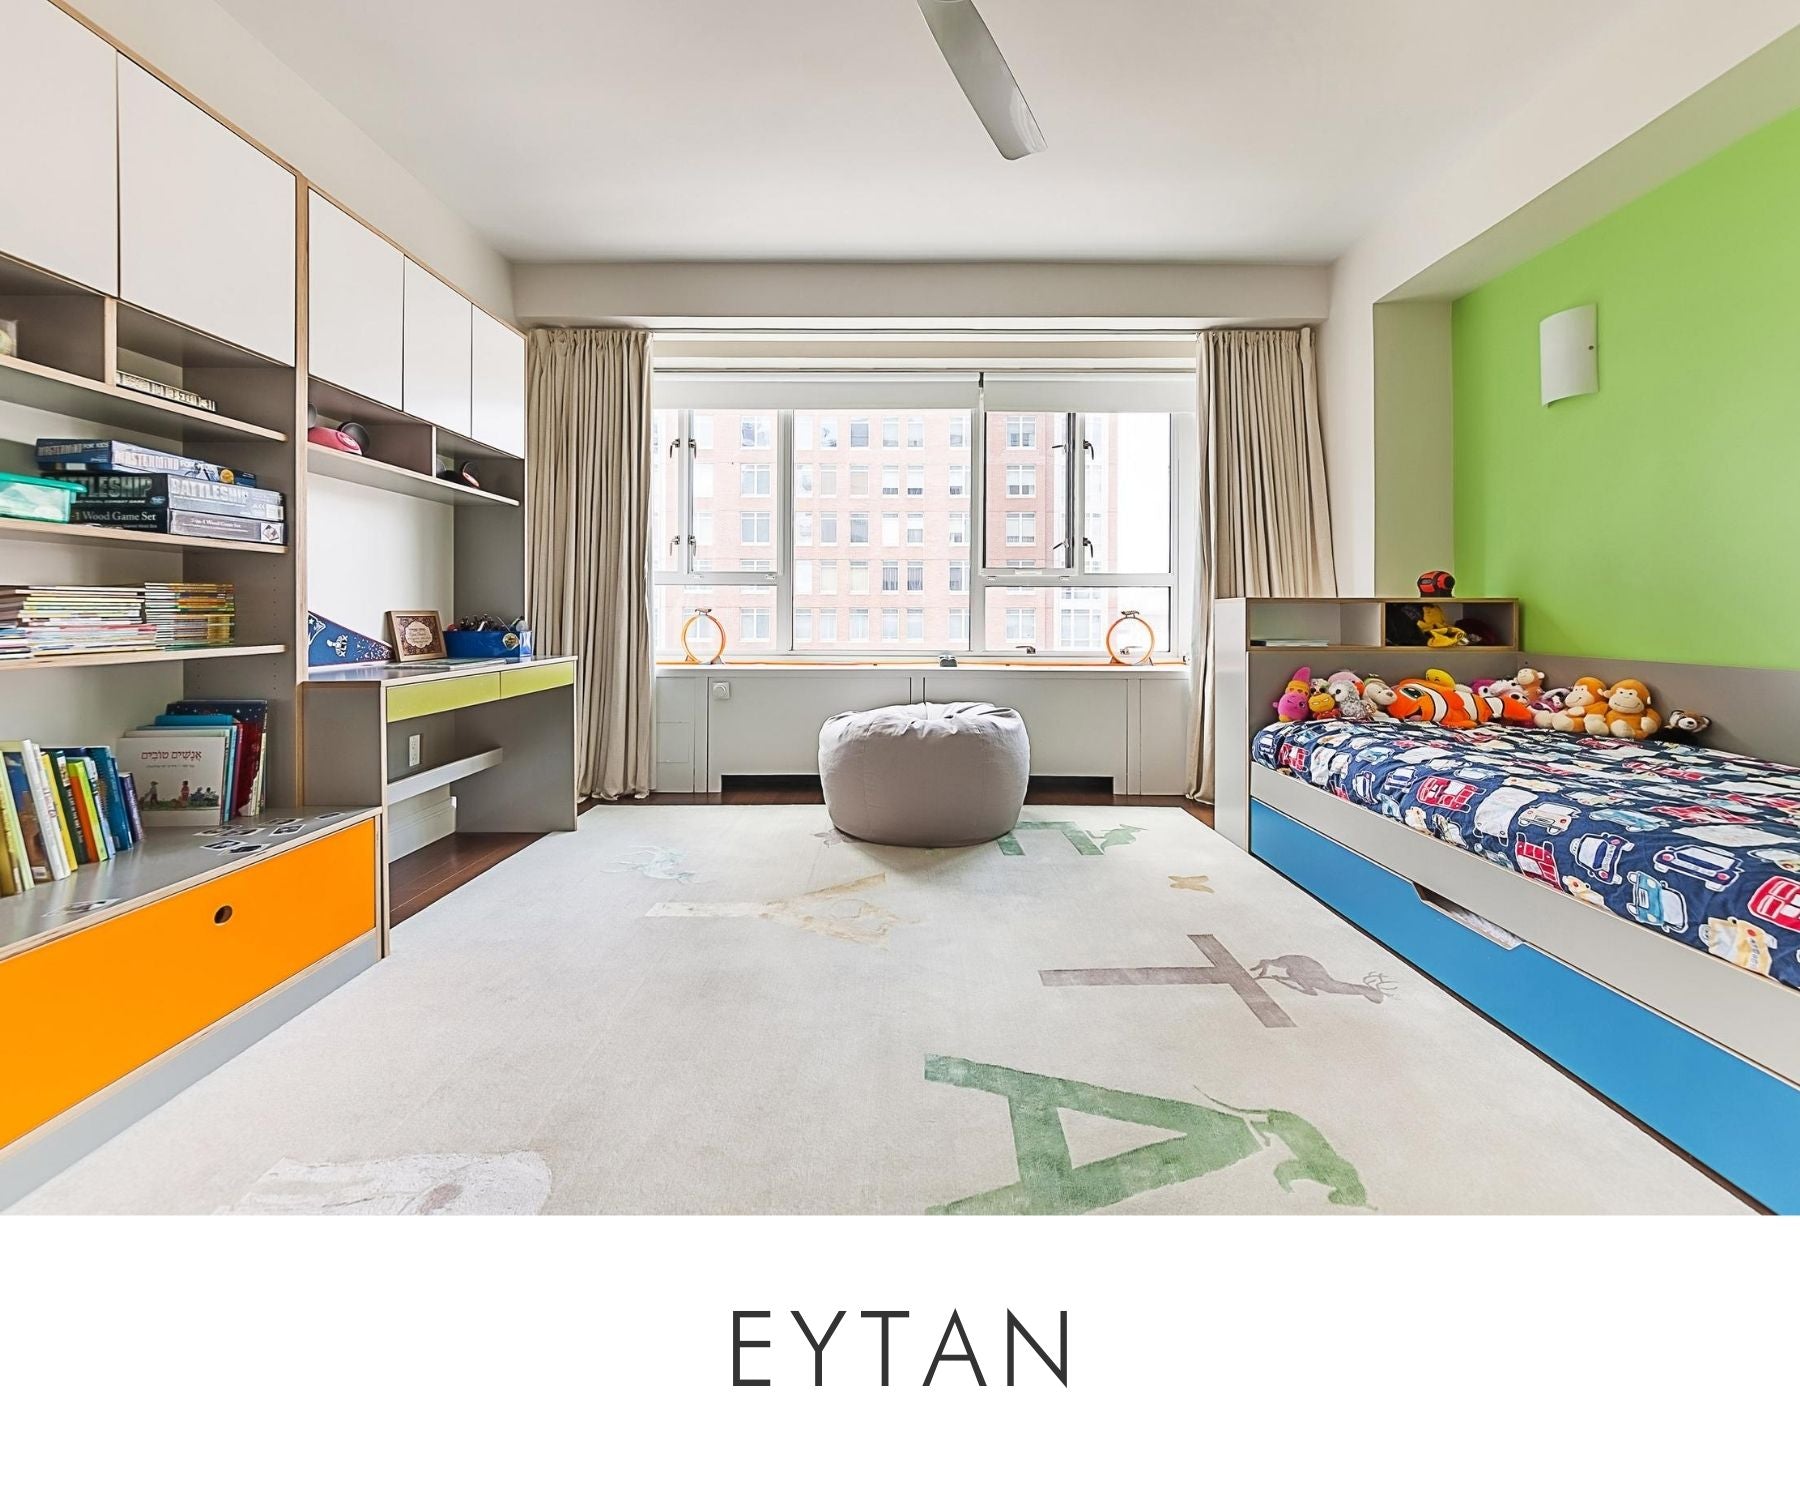 Eytan room bright and colorful child's room with a long bed, playful rug, and extensive shelving.